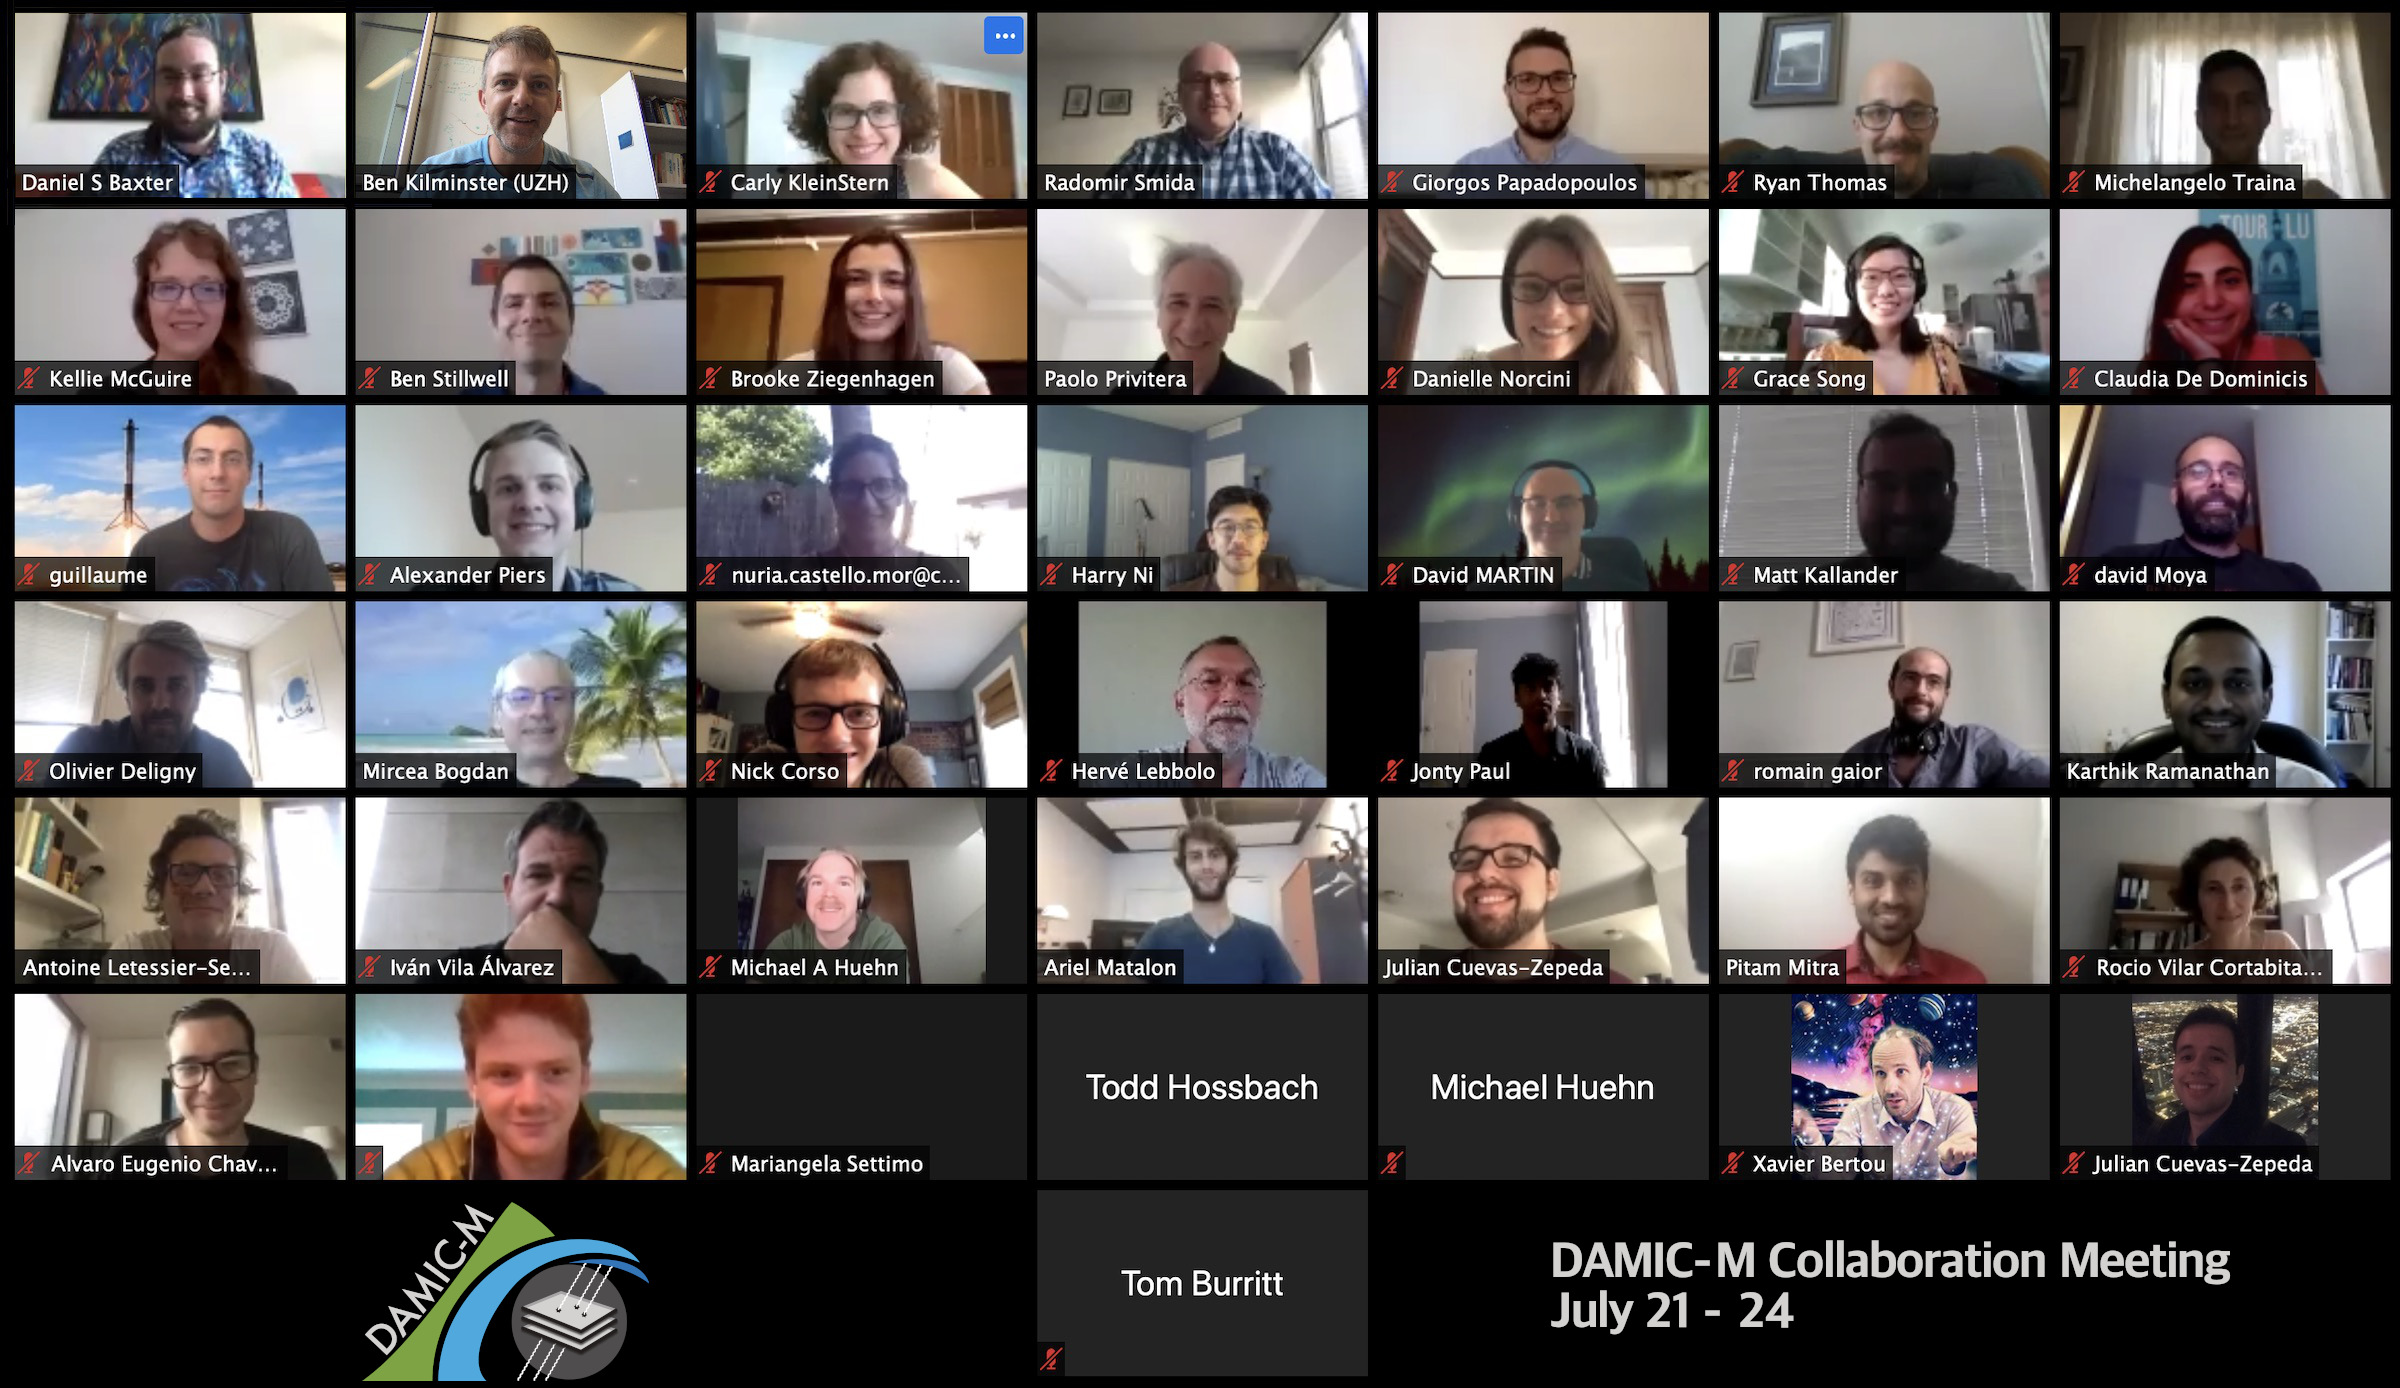 Picture: DAMIC-M Collaboration Meeting